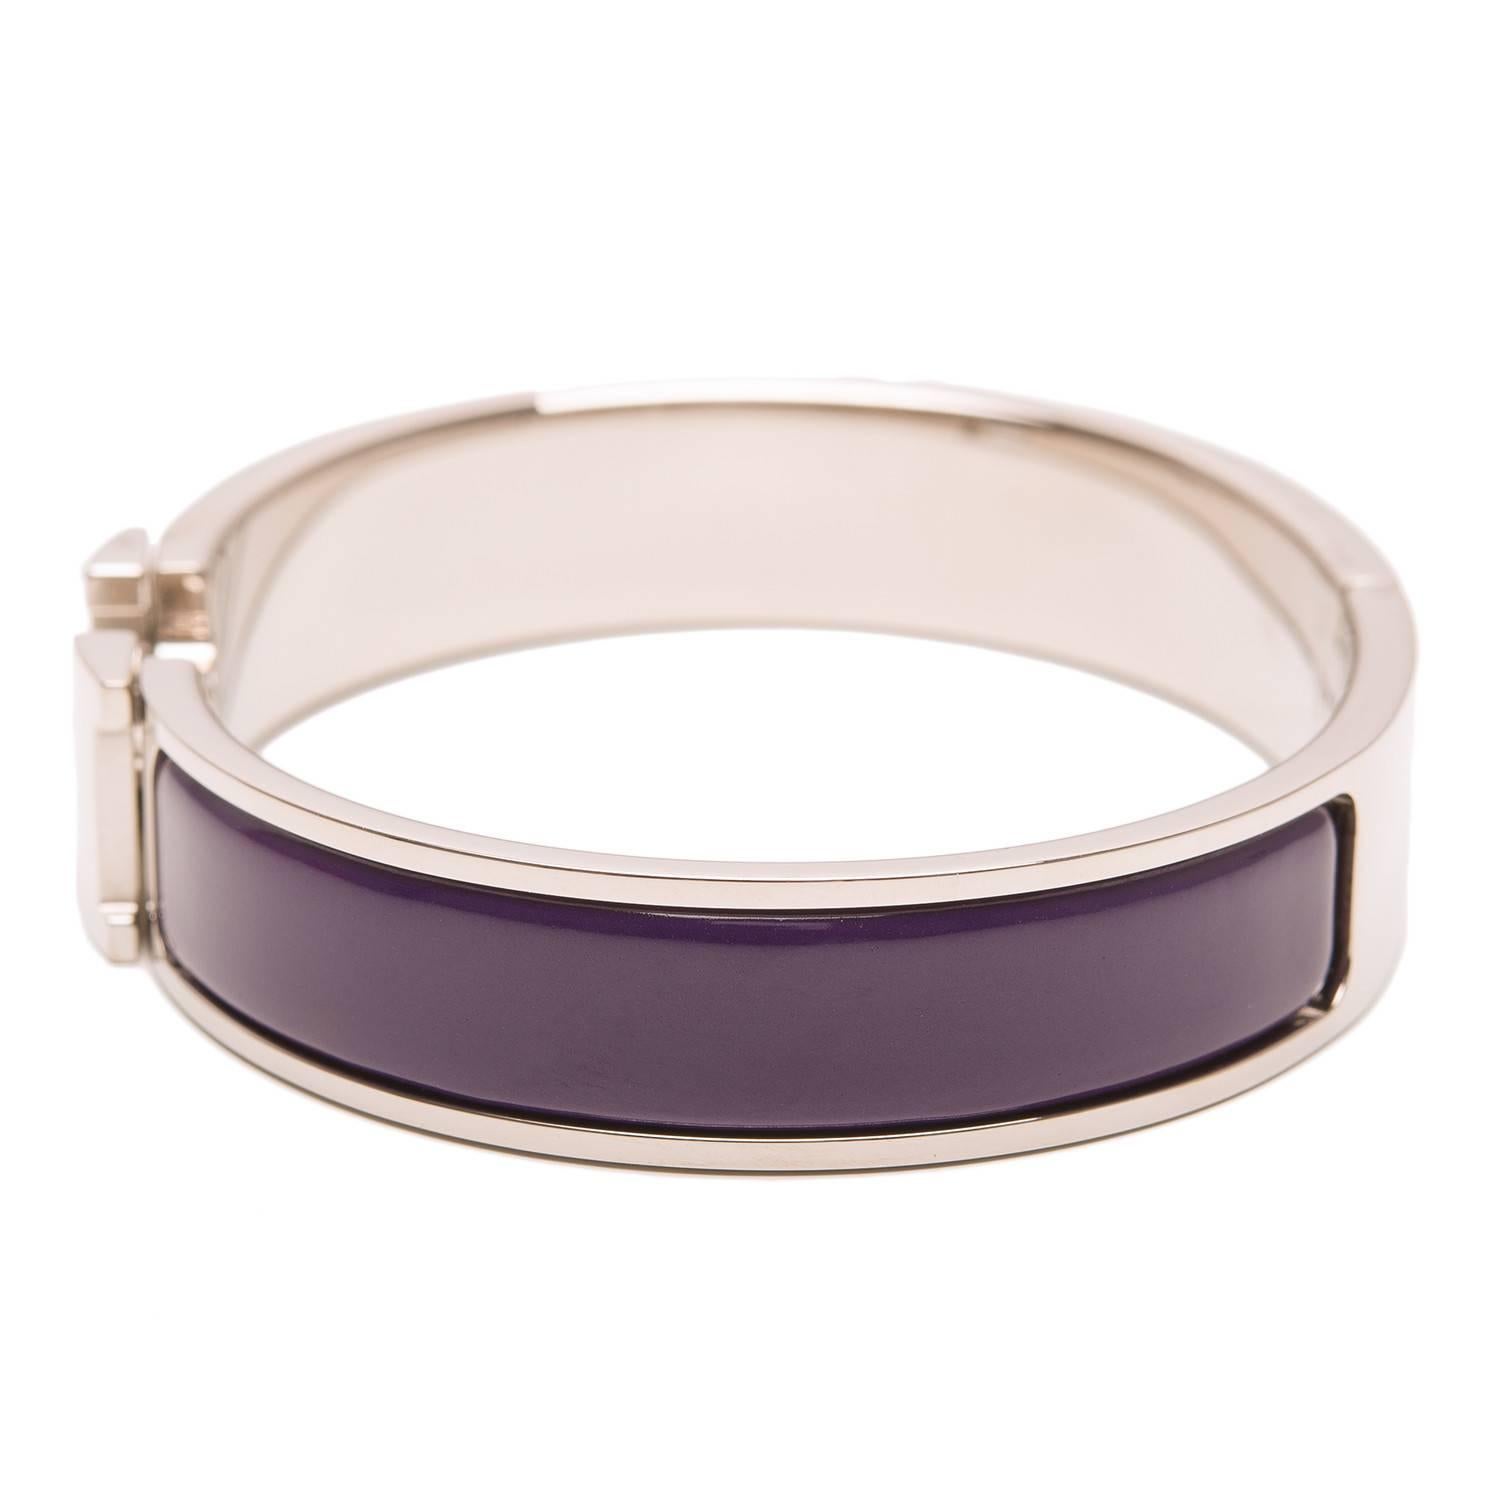 Hermes Narrow Clic Clac H bracelet in Prune enamel with palladium and silver plated hardware in size PM.

Origin: France

Condition: Excellent - minor scratches on the metal; no signs of wear on enamel

Accompanied by: Hermes box,